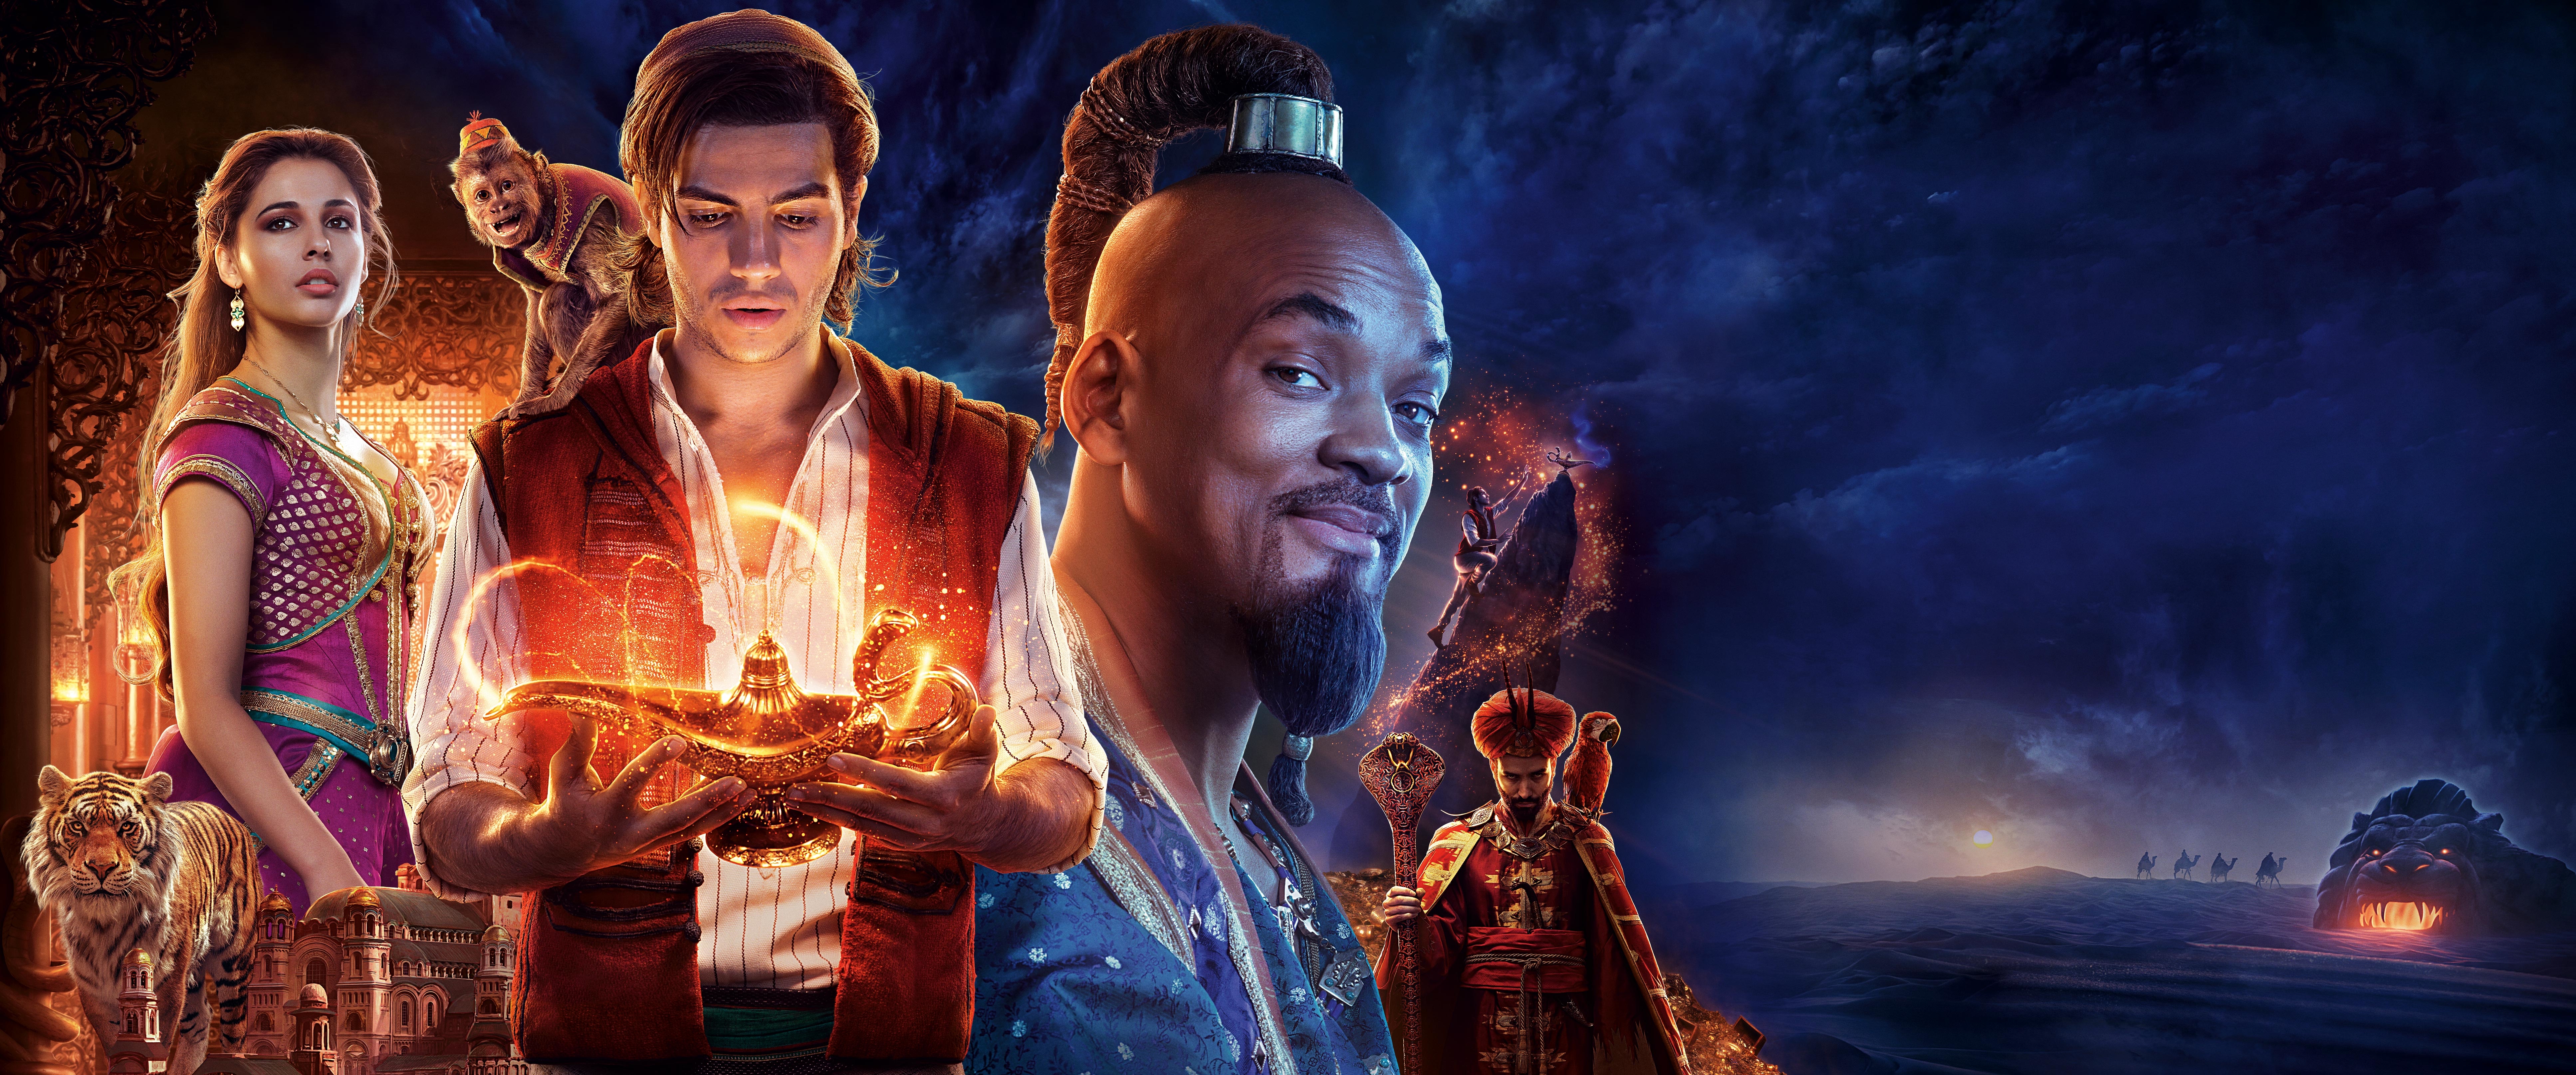 Aladdin Movie 2019 Wallpaper, HD Movies 4K Wallpapers, Images, Photos